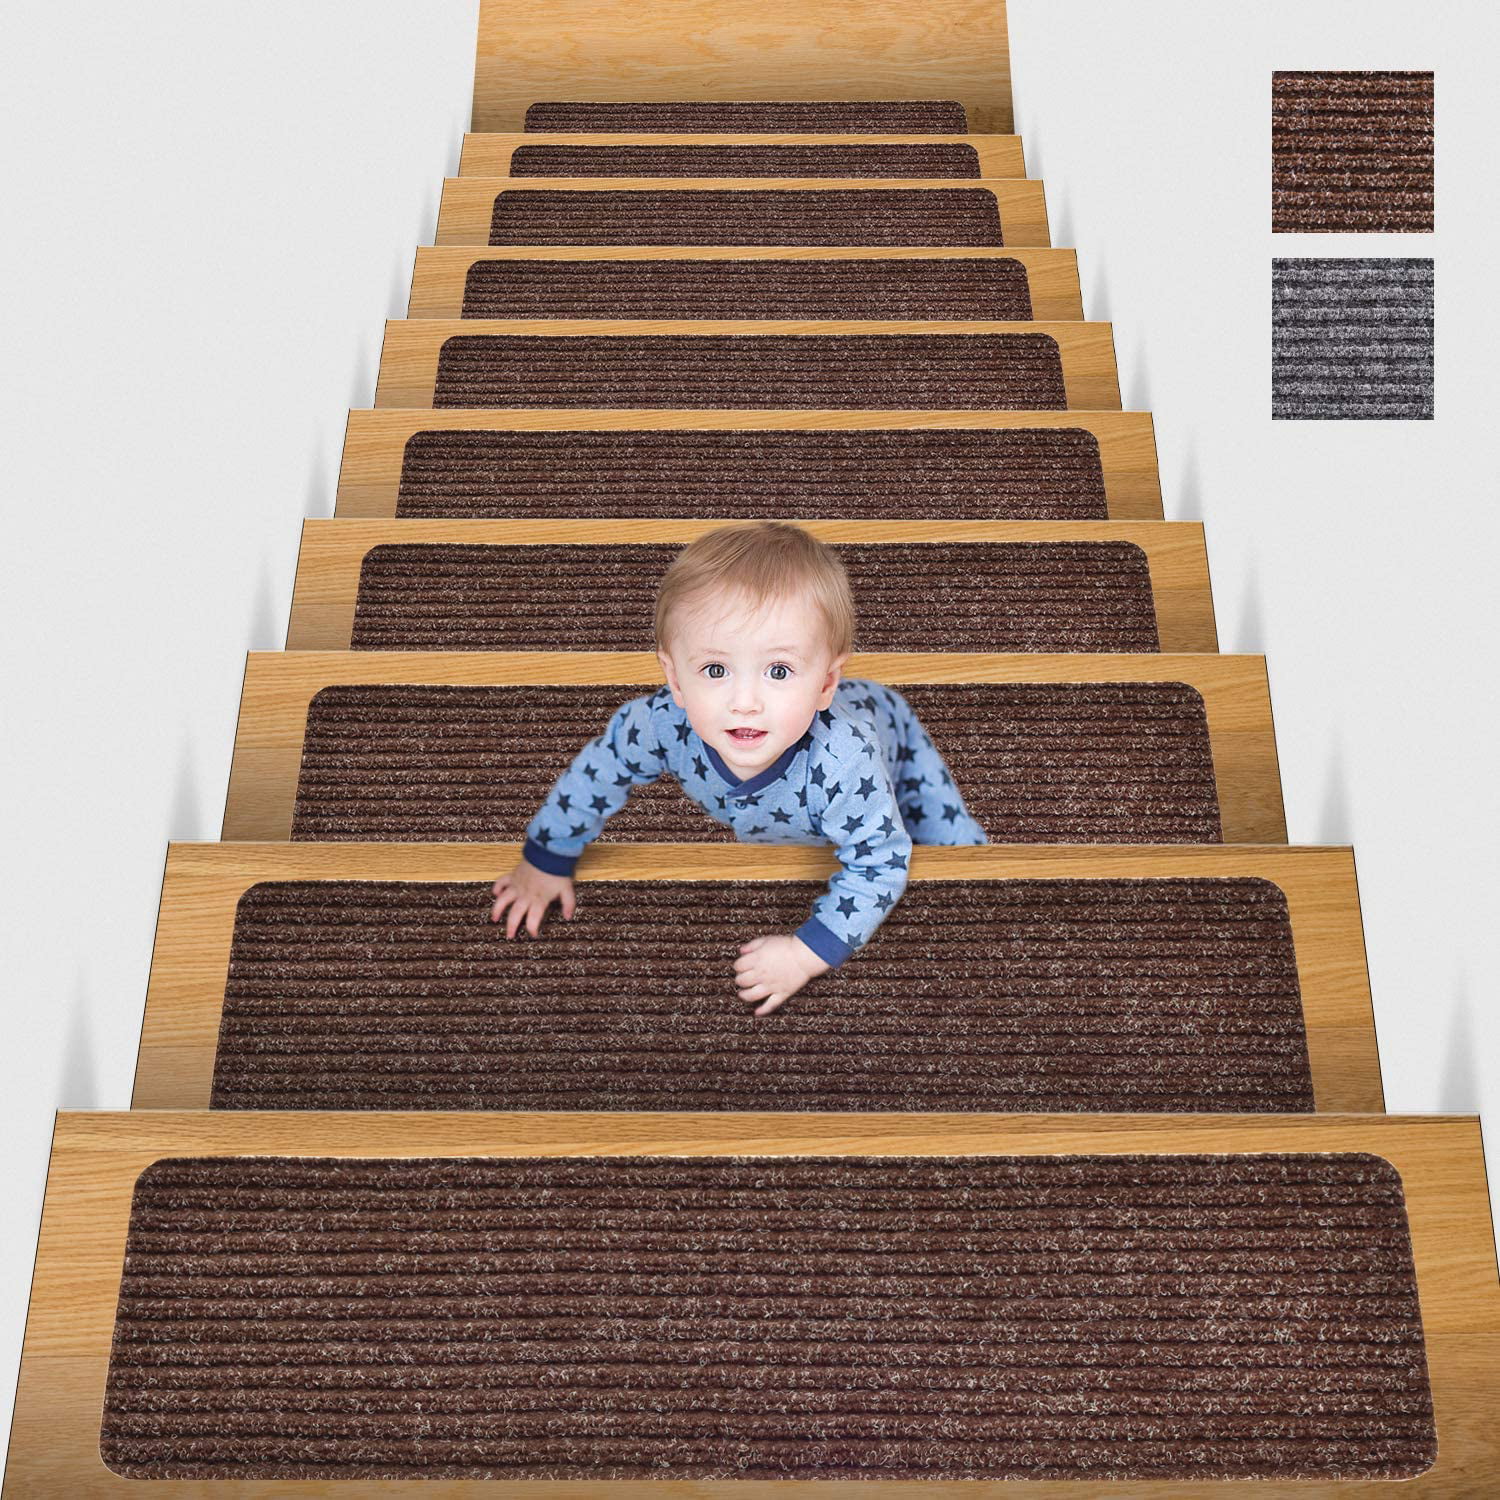 Beige, Set of 15 Anti Moving Grip and Beauty Rug Tread Safety for Kids Elders and Dogs 30 X 8 CrystalMX Non-Slip Carpet Stair Treads